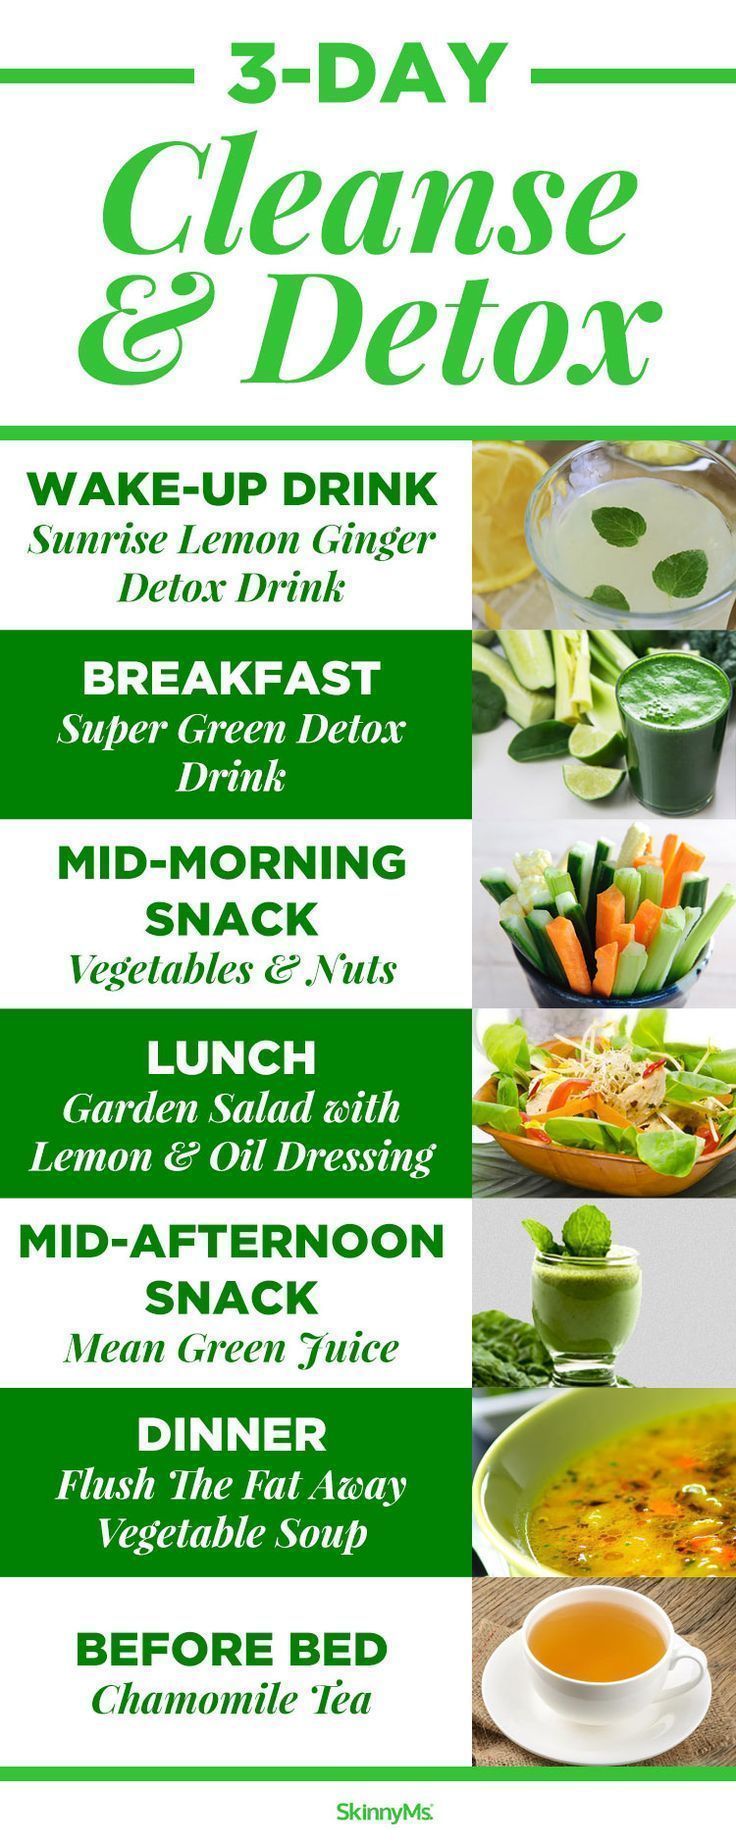 Three Day Cleanse & Detox -   17 diet Body cleanses ideas